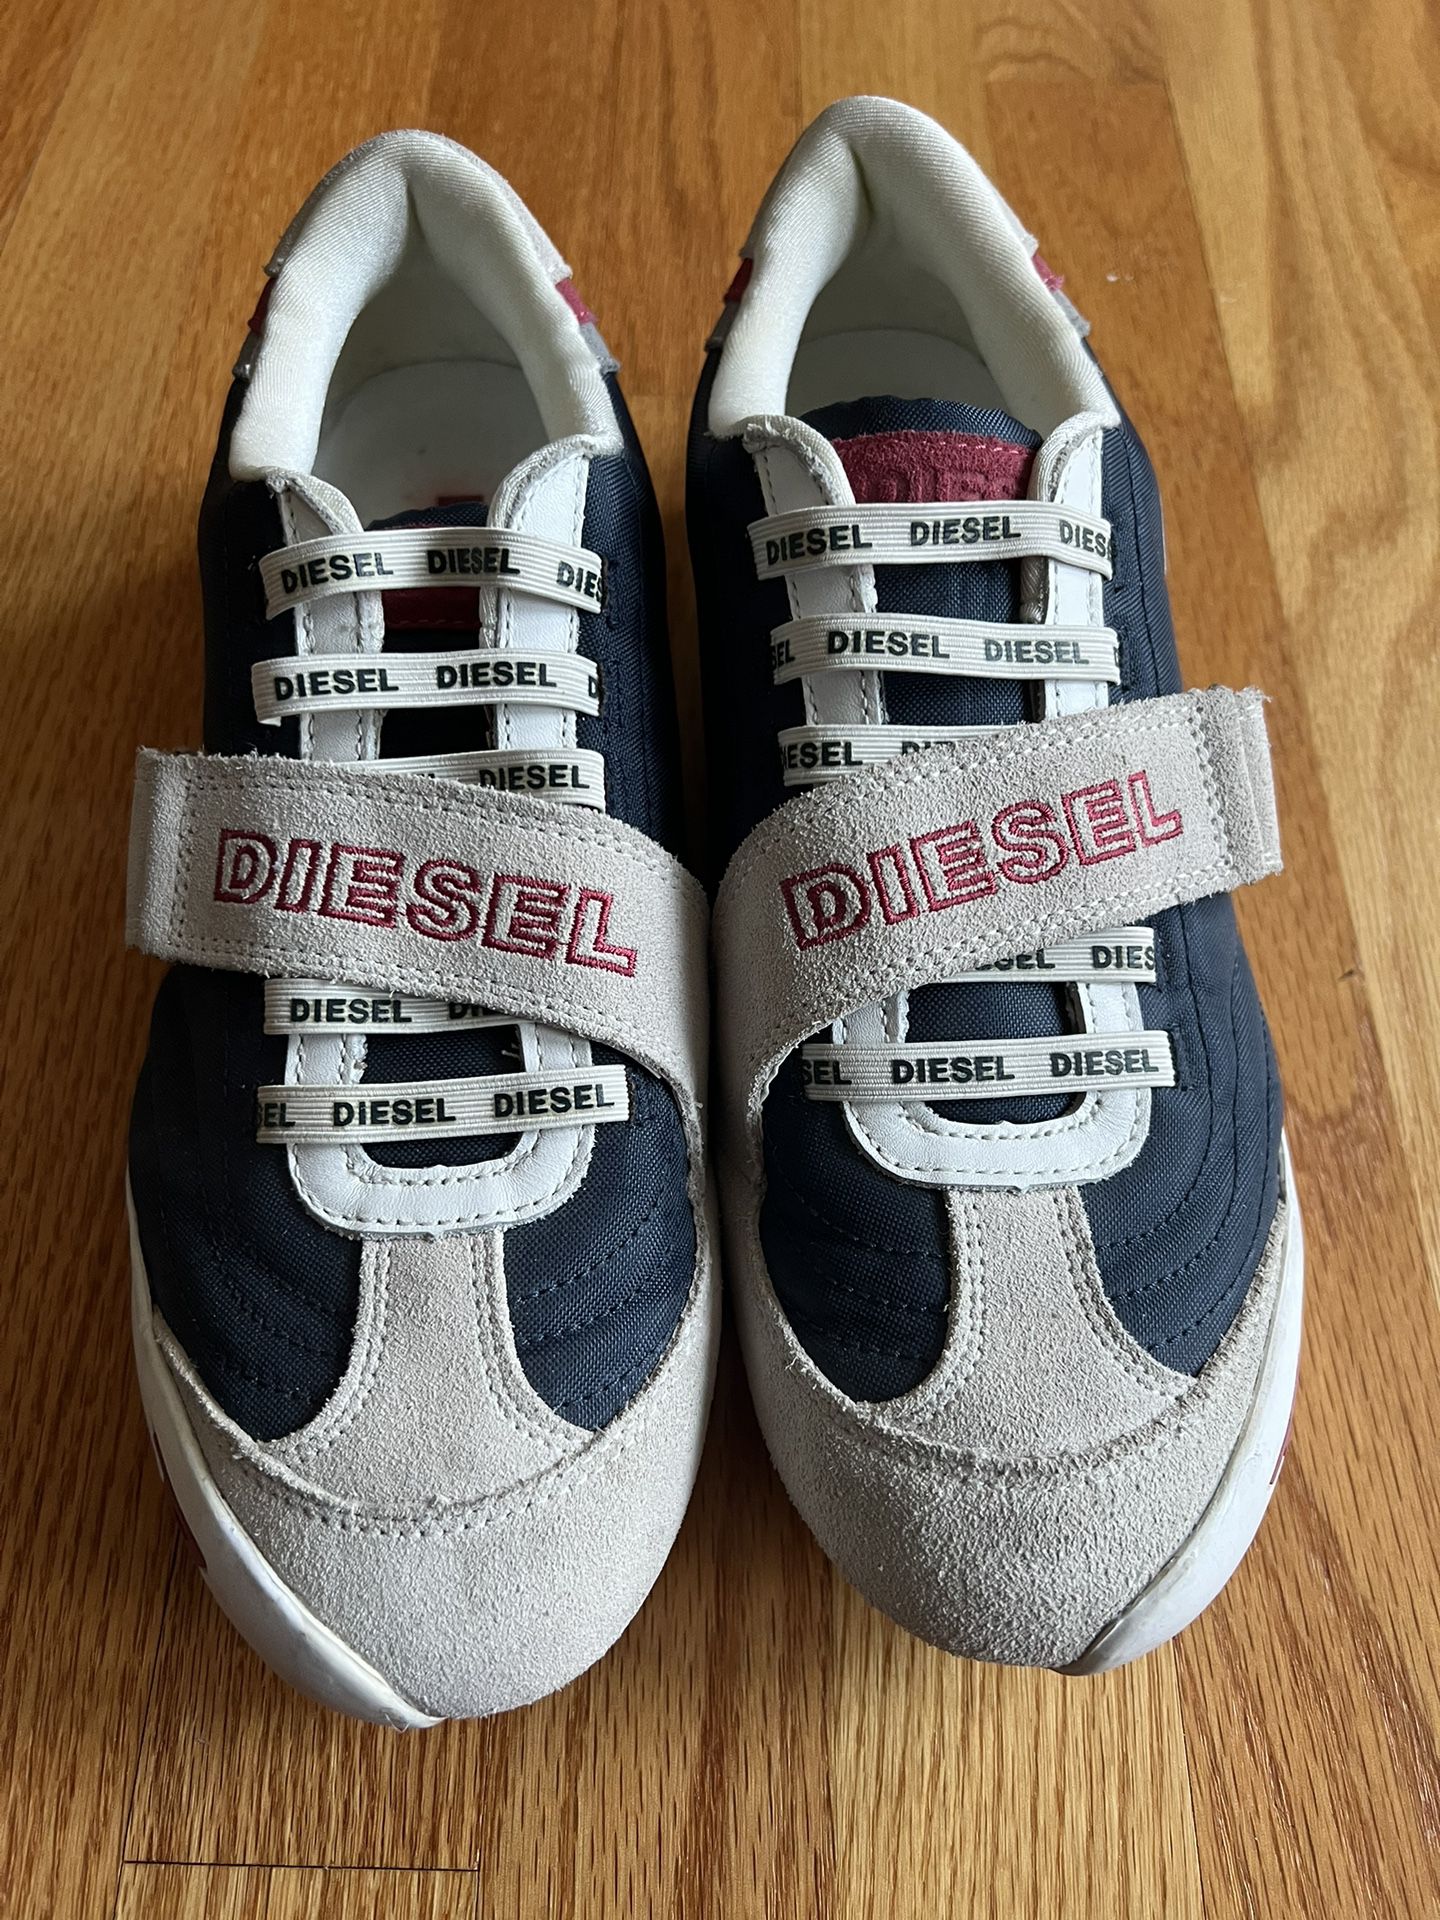 Diesel Sneakers Mens 9 Gray Blue Rare Korbin II Top Lace Up Shoes for Sale in Wolcott, CT - OfferUp